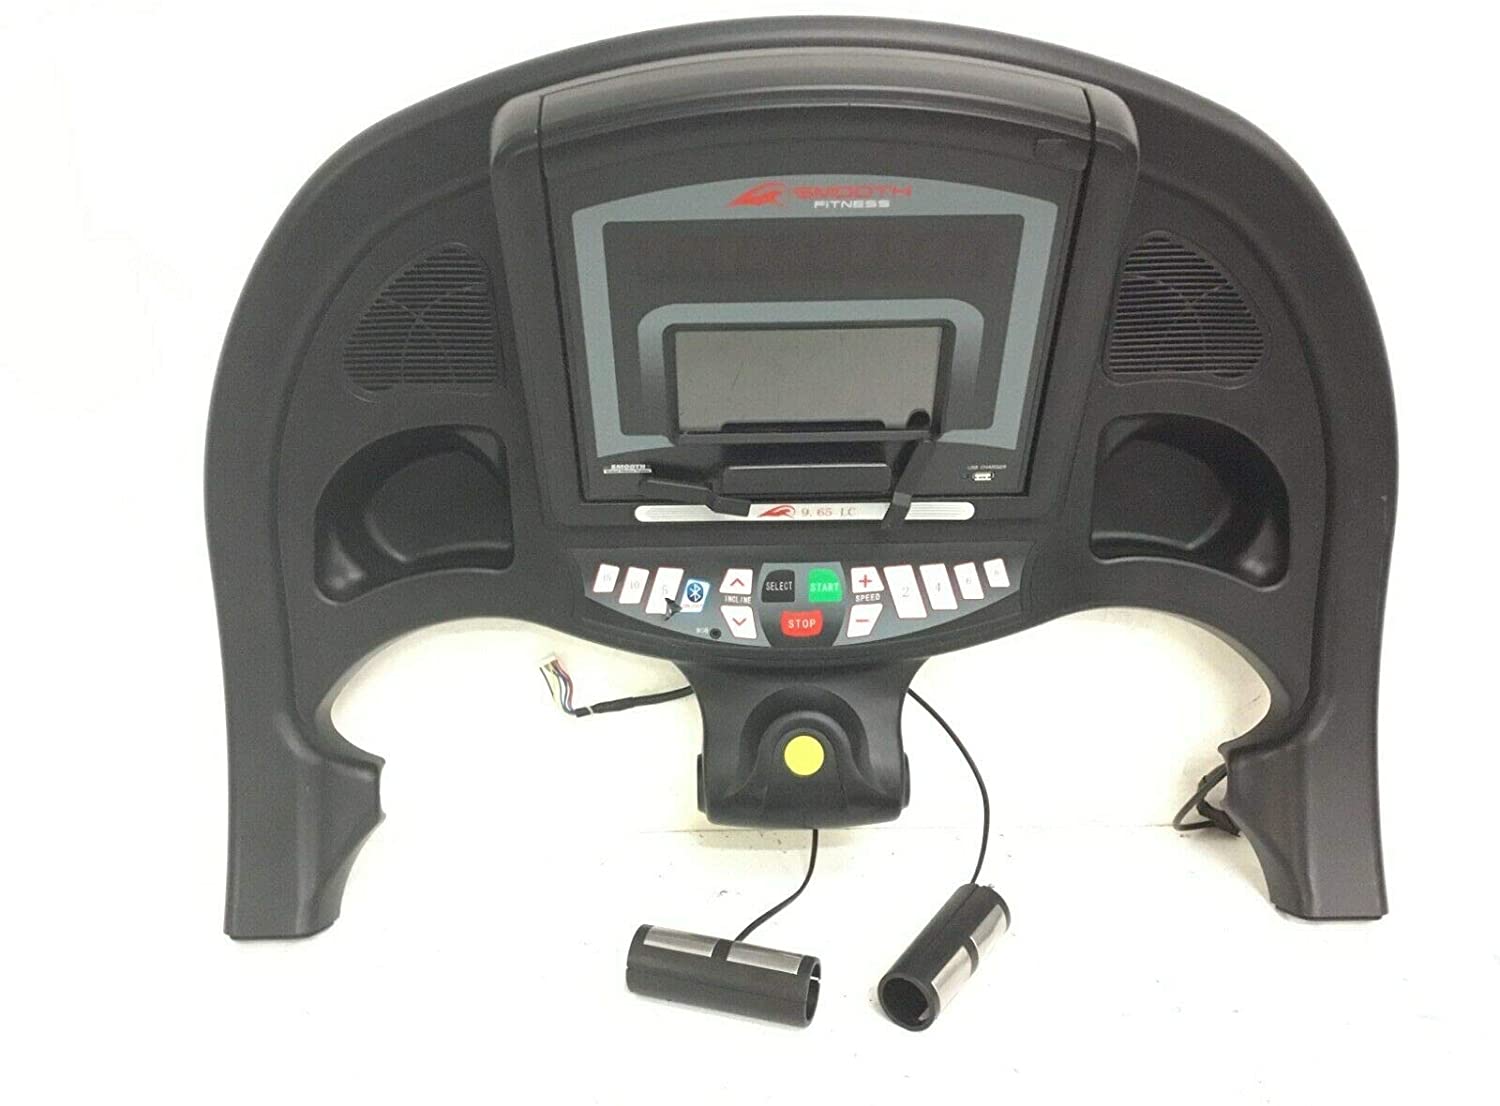 Smooth Display Console Panel Works Fitness 9.65 LC or 9.65 LCi Treadmill (Used)